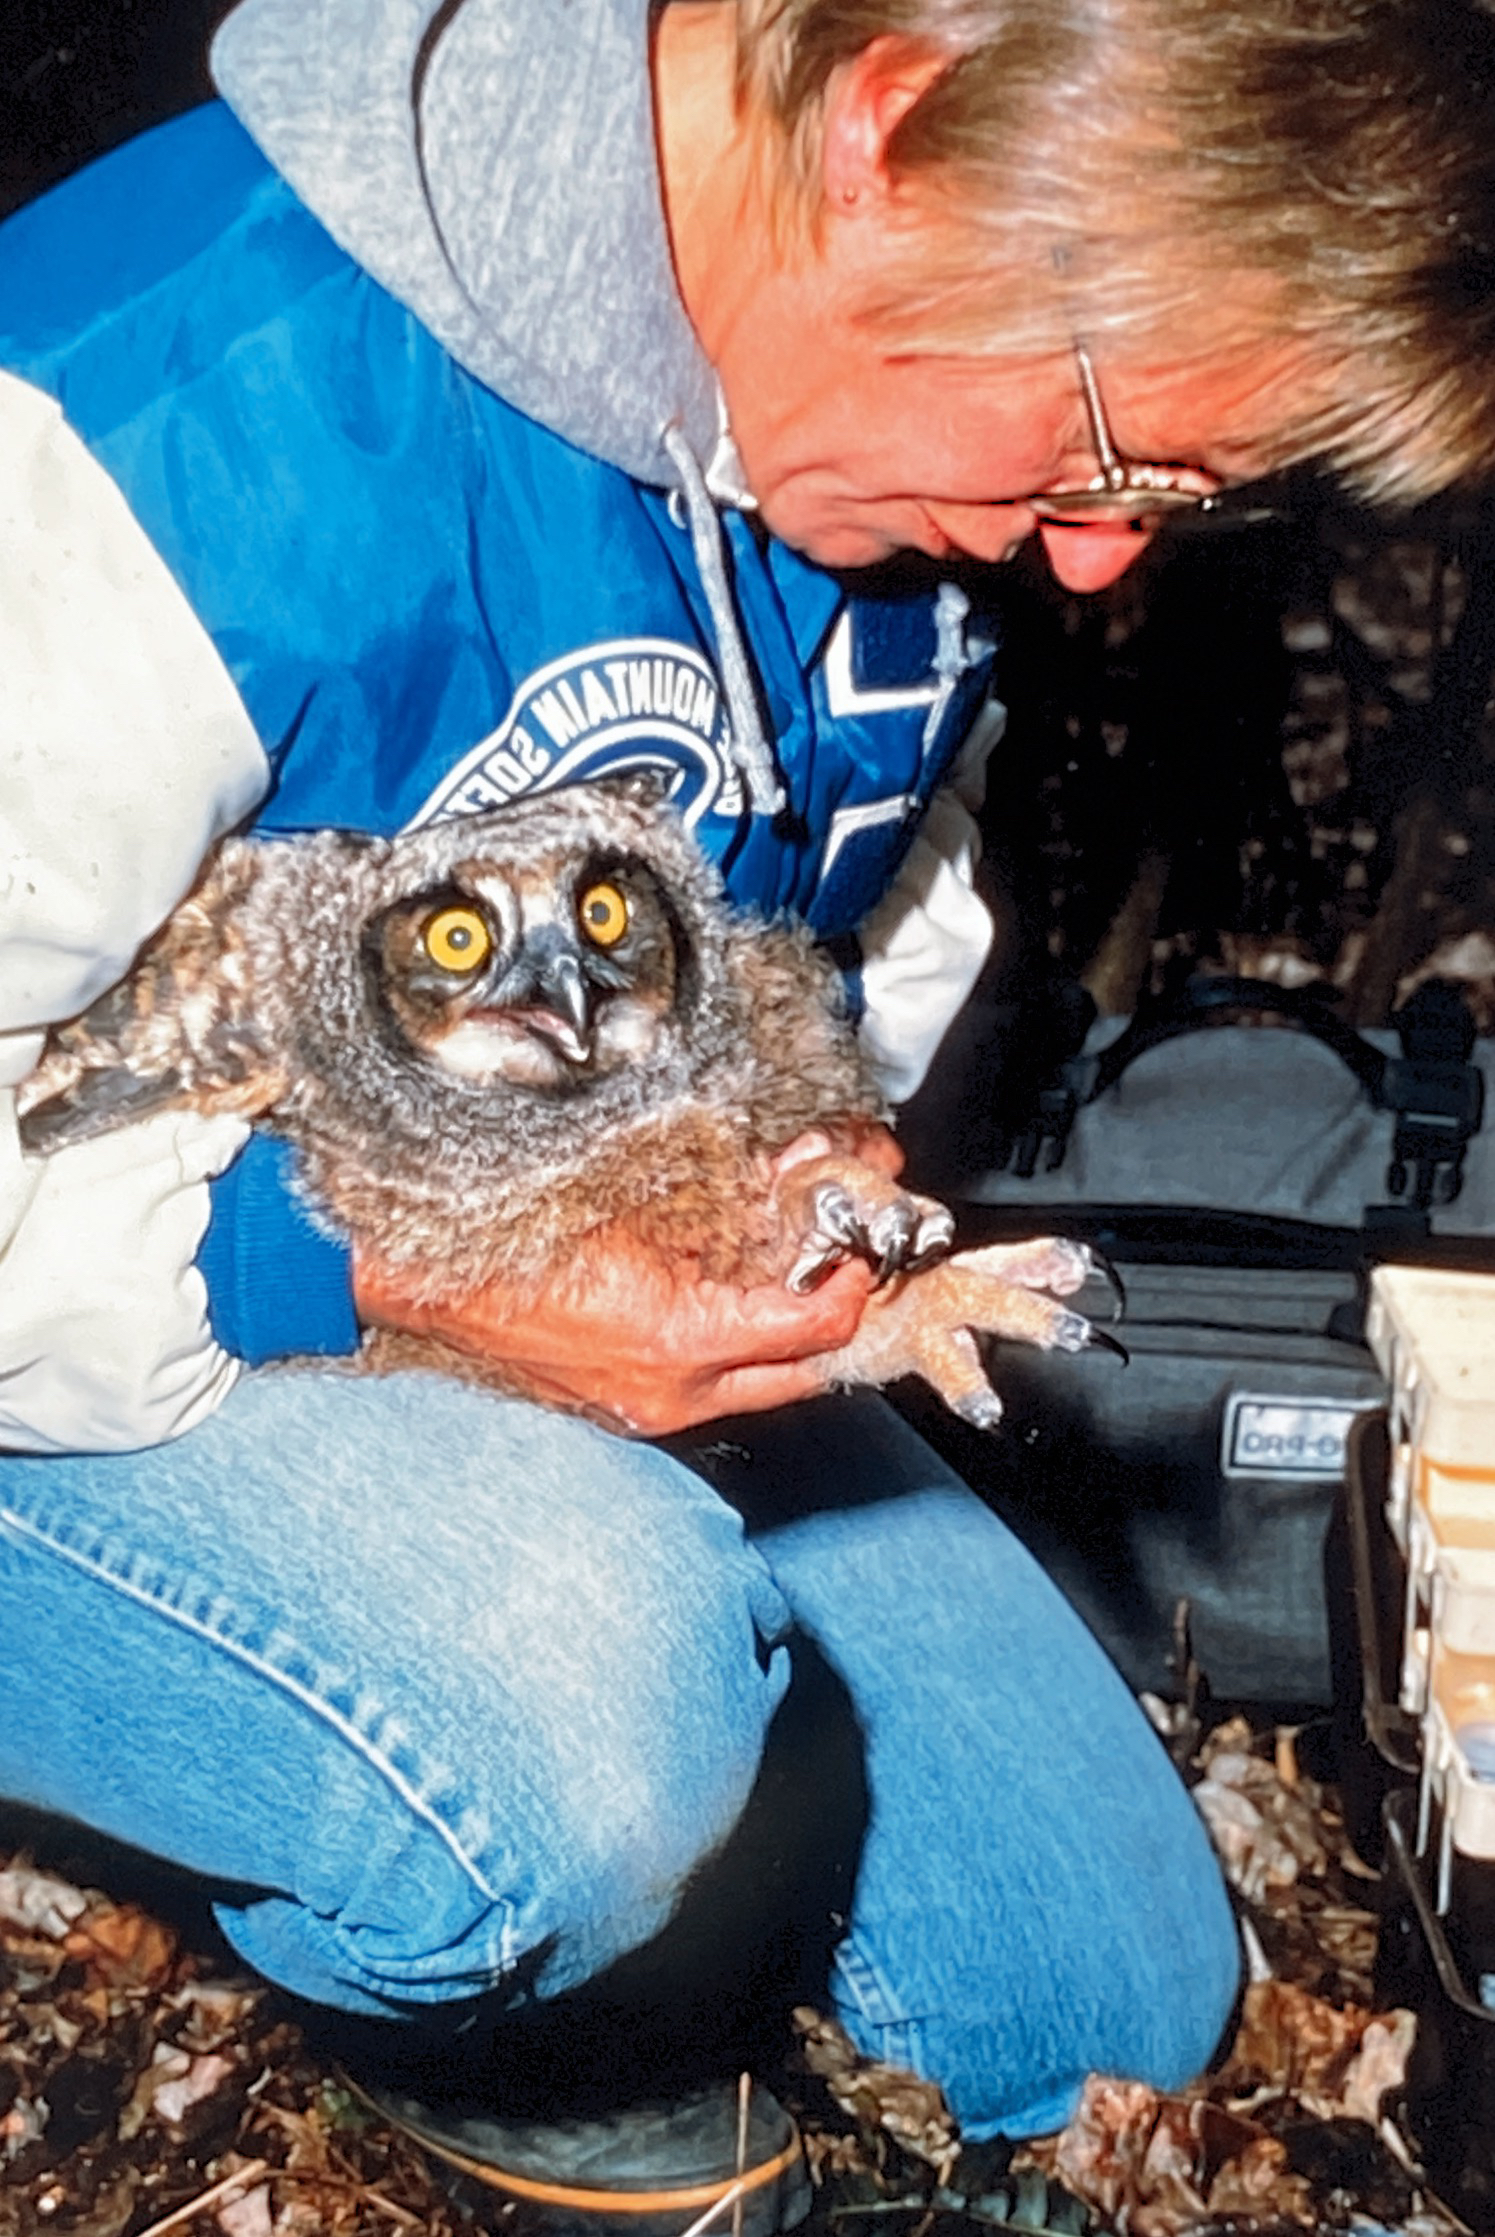 Hear ornithologist Judy Wink talk about the nesting cycle of the Great Horned Owl thumbnail